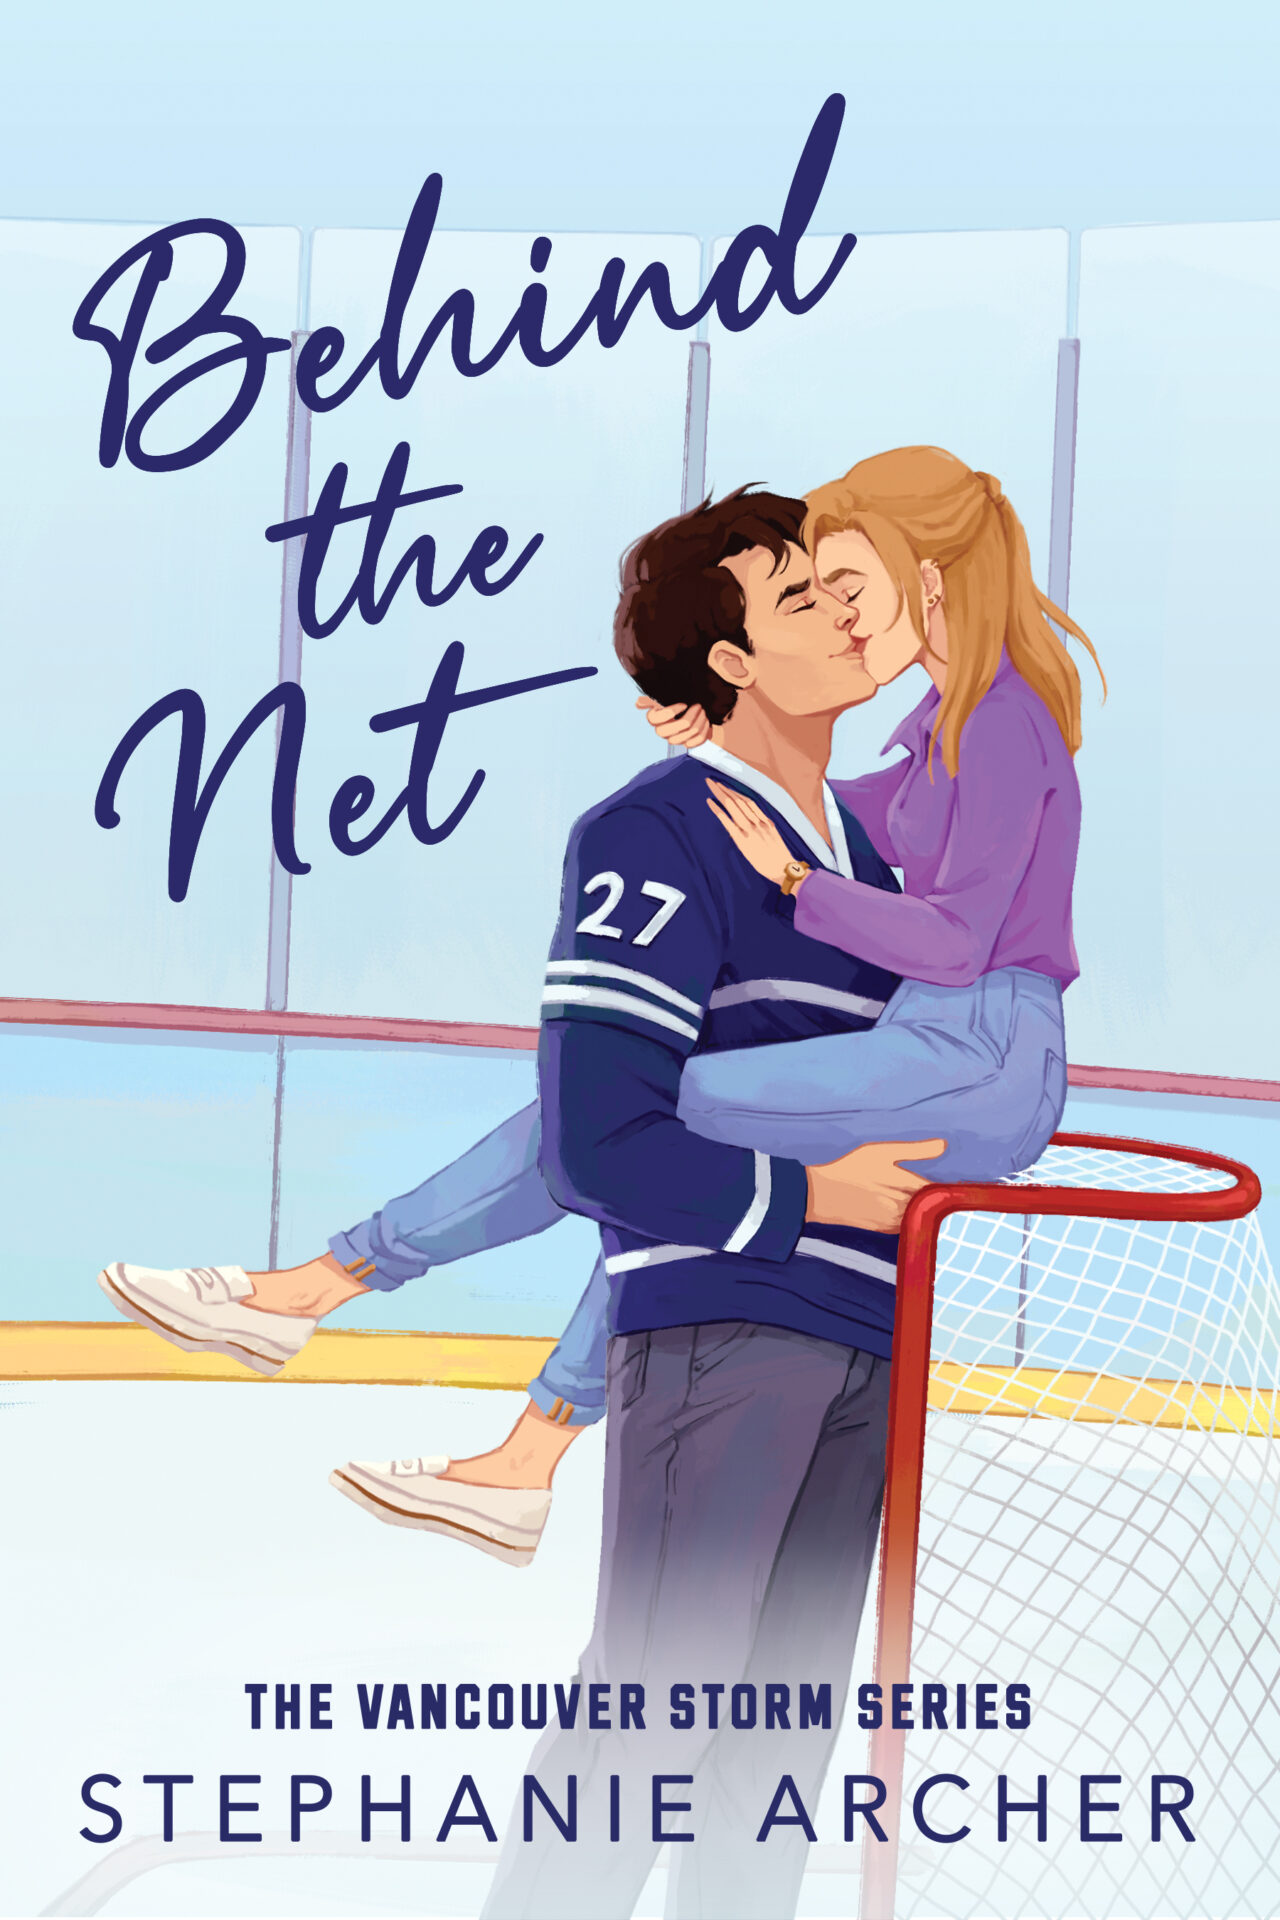 "Behind the Net" by Stephanie Archer